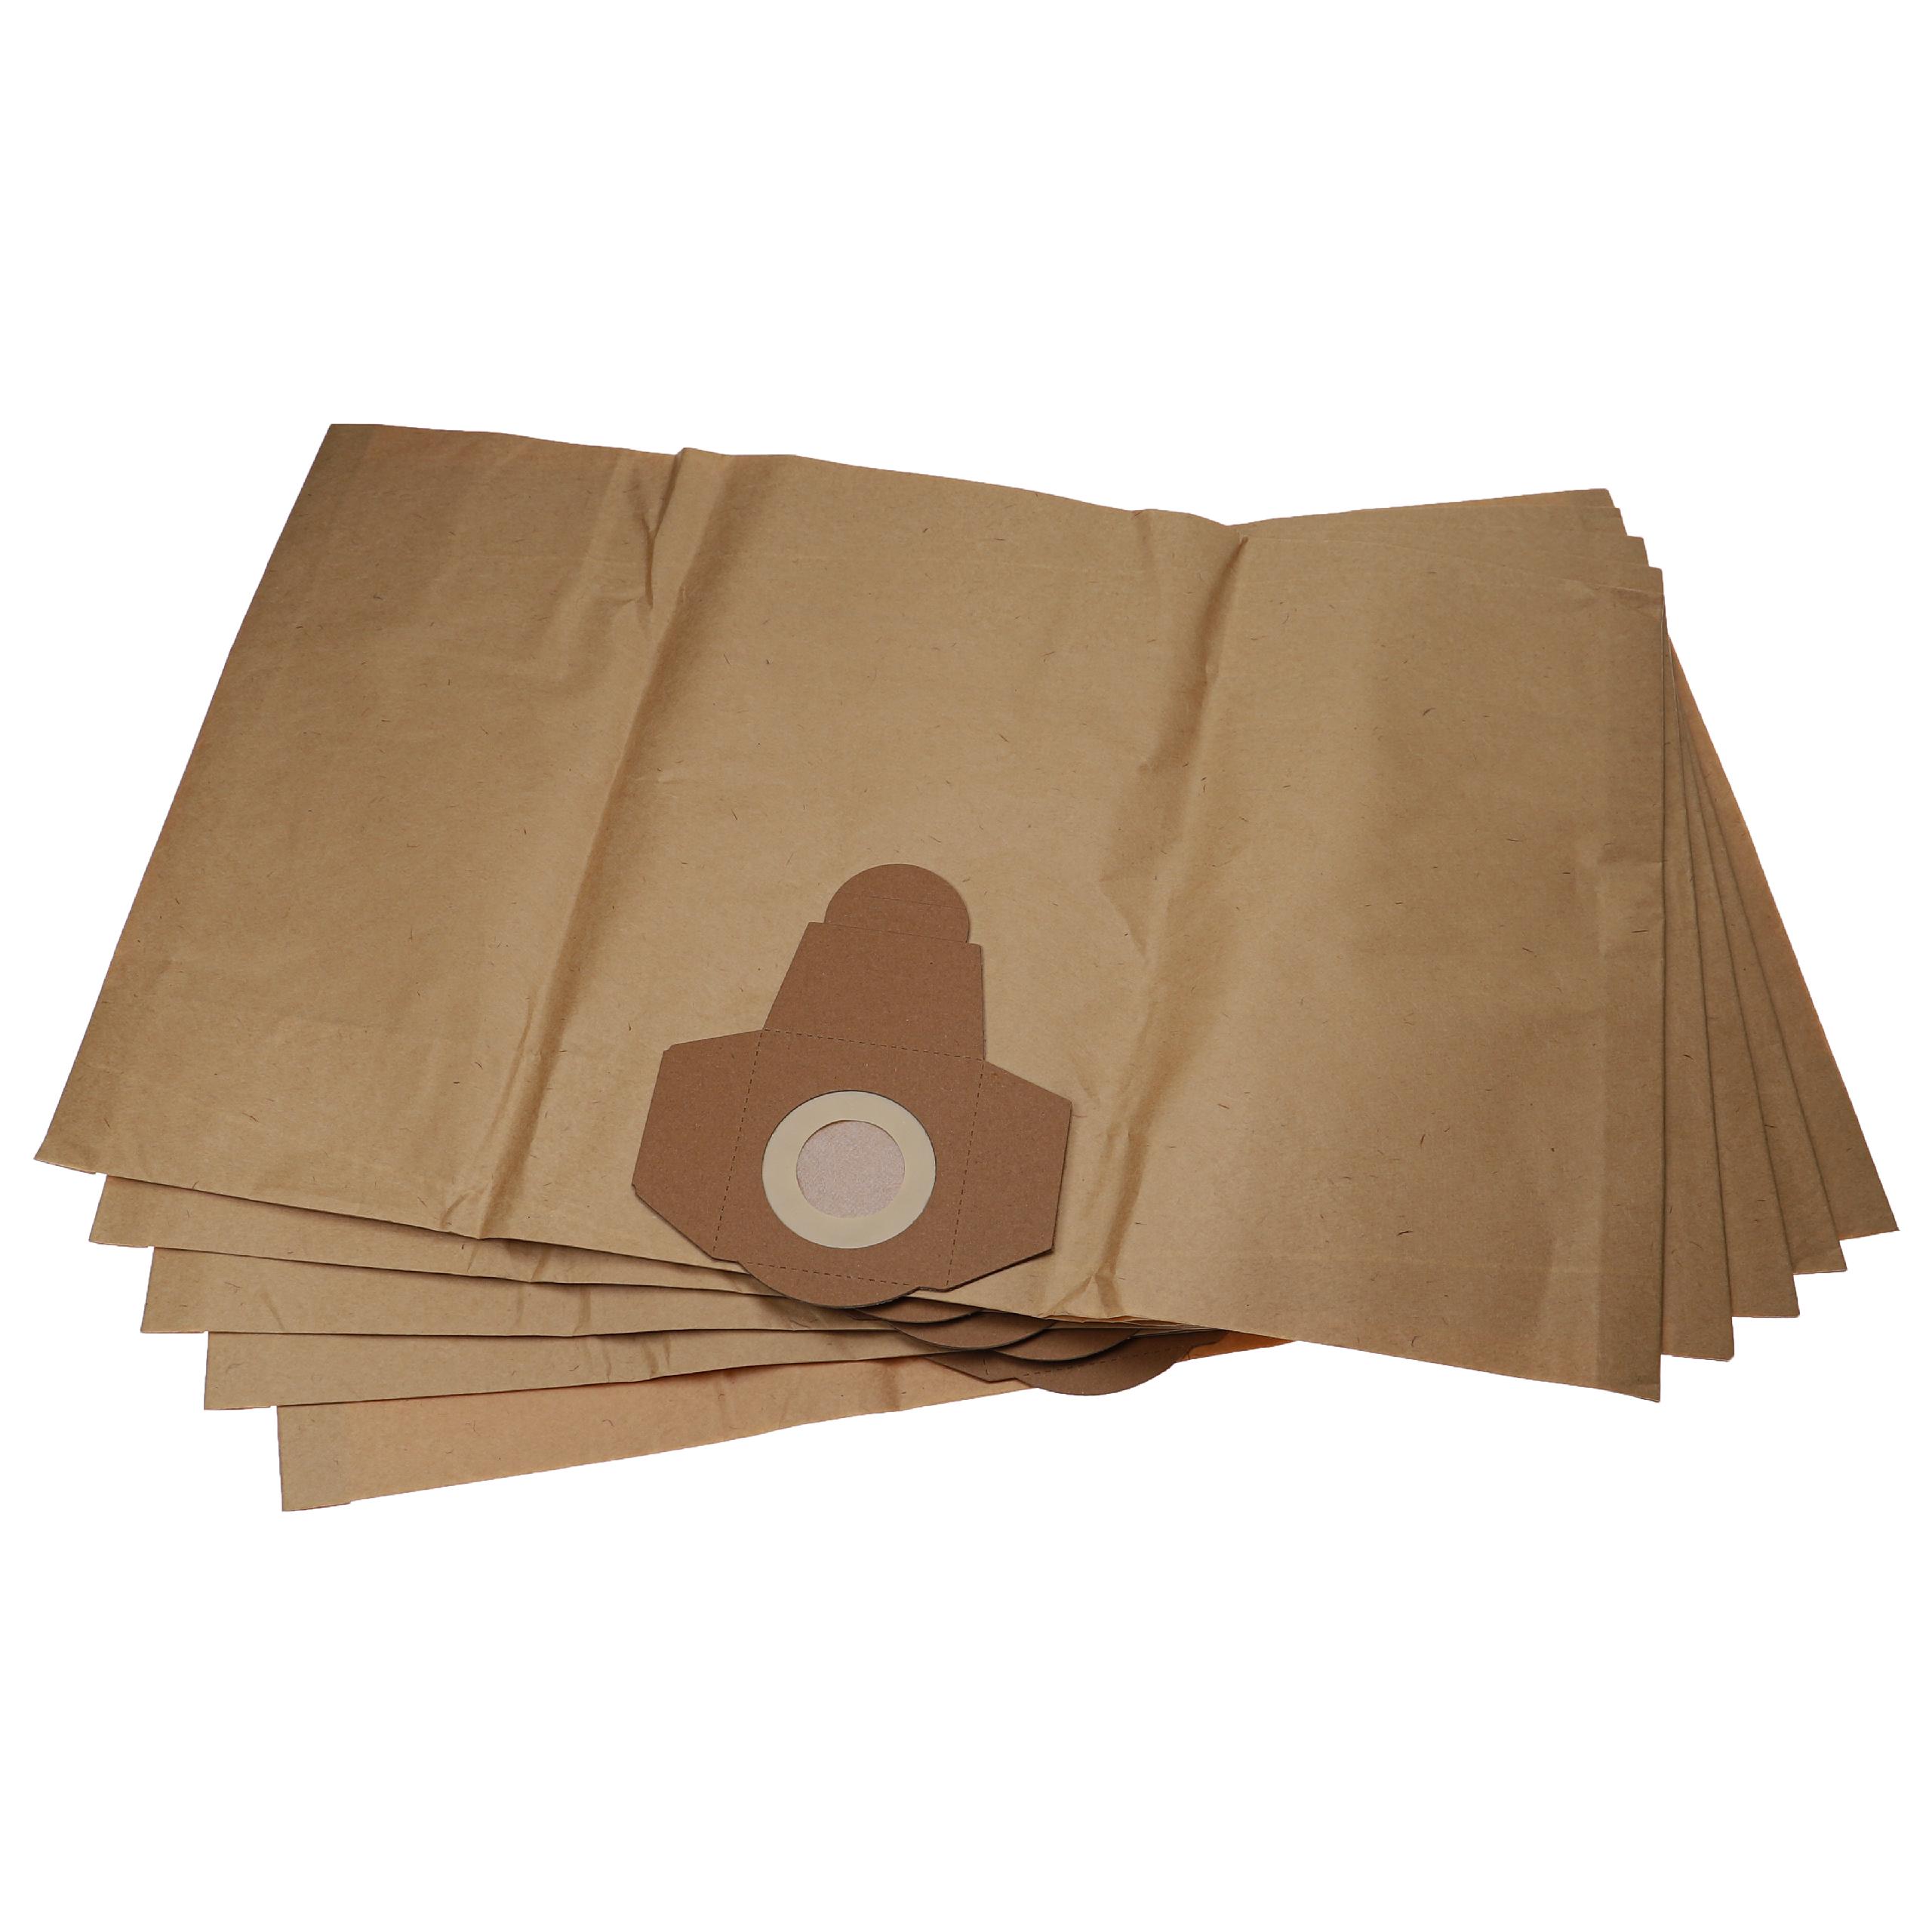 5x Vacuum Cleaner Bag replaces 30250133, 4035485011445 for Parkside - paper